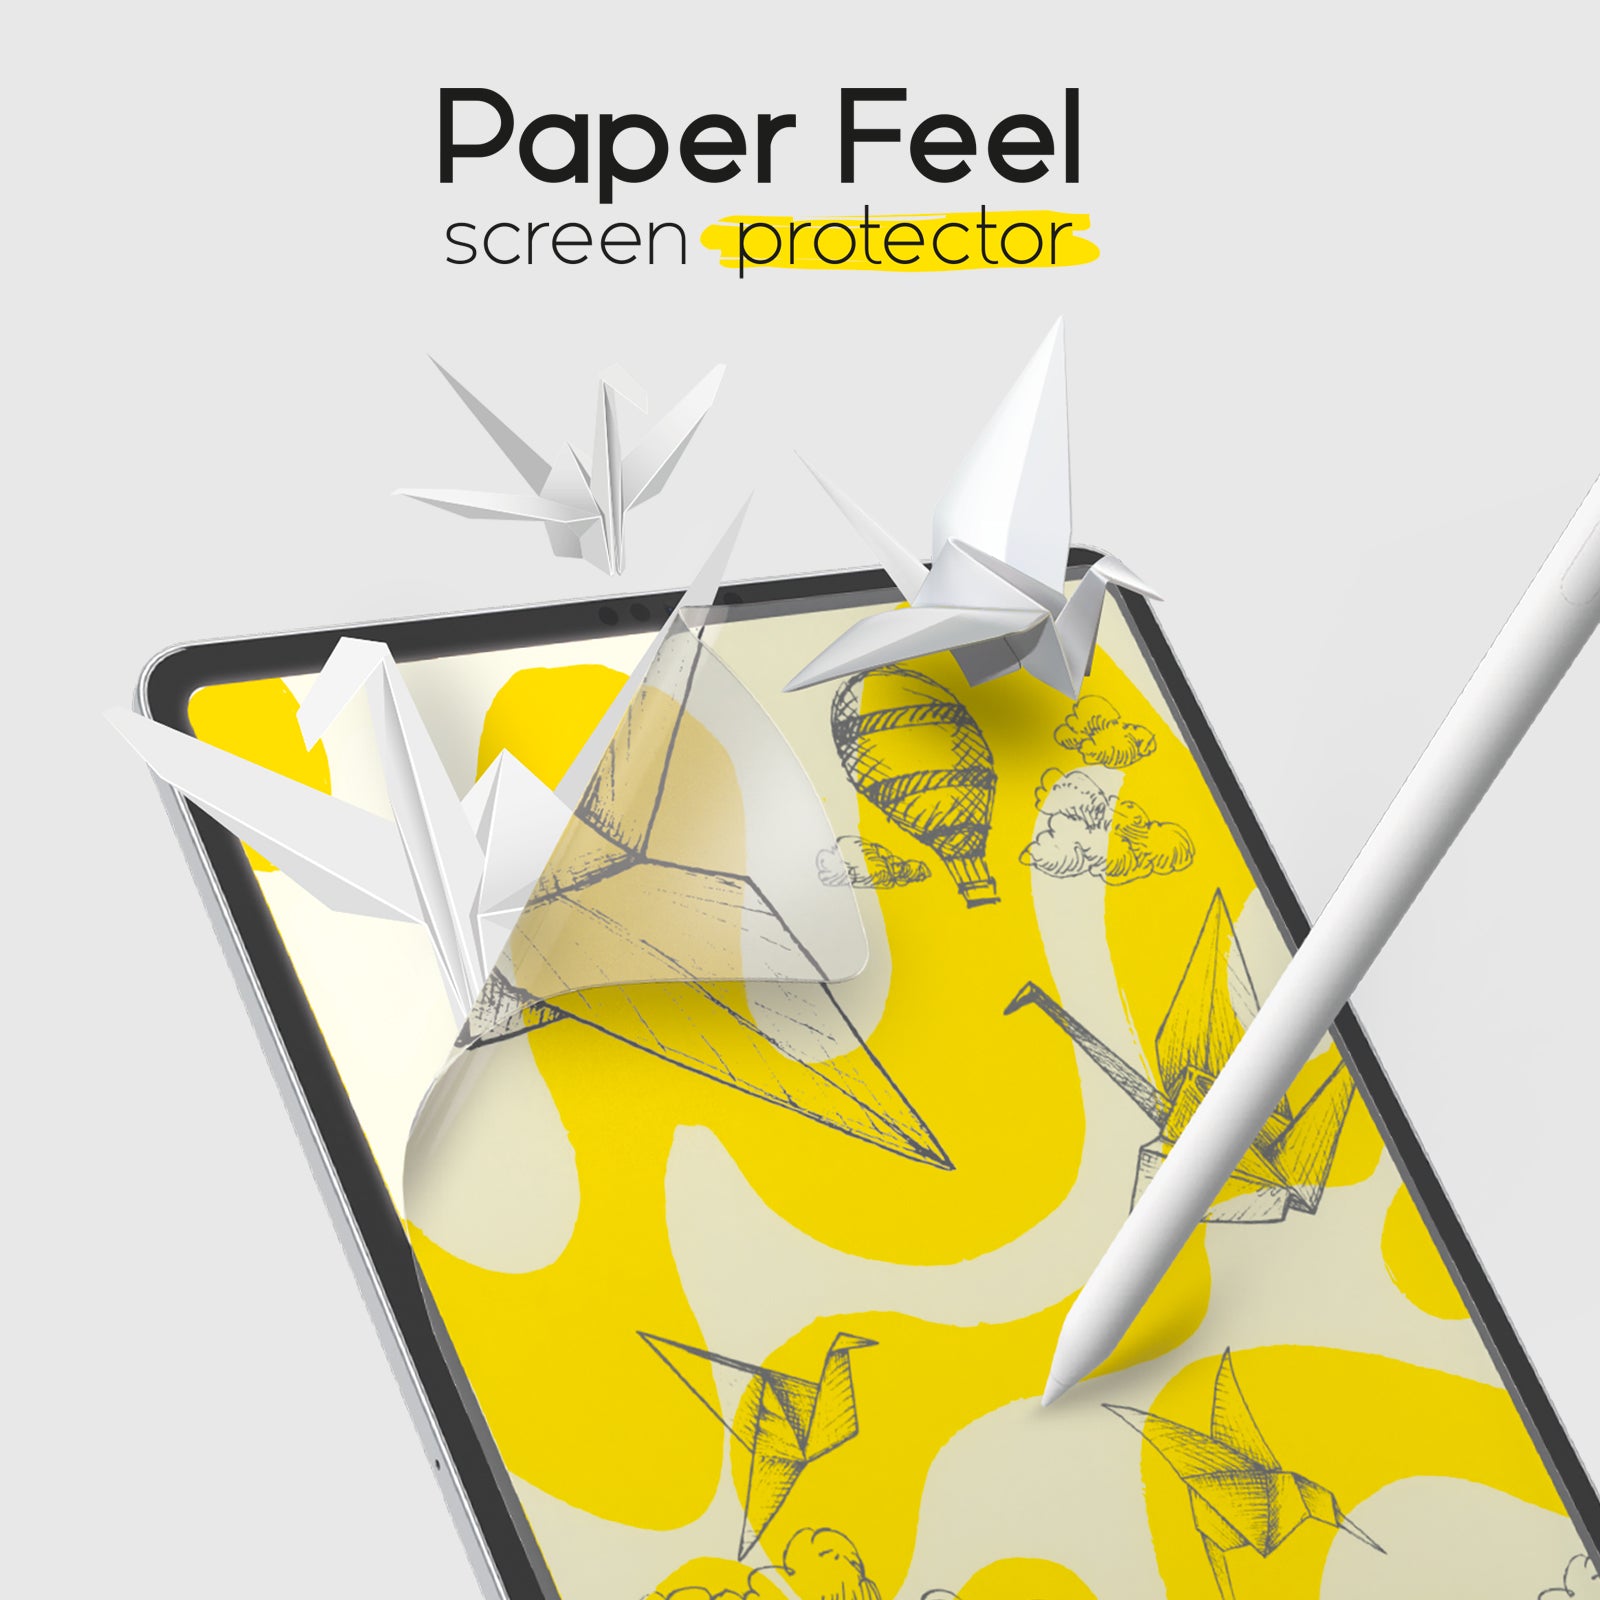 doodroo's paper-feel protective film for reMarkable 2 by doodroo